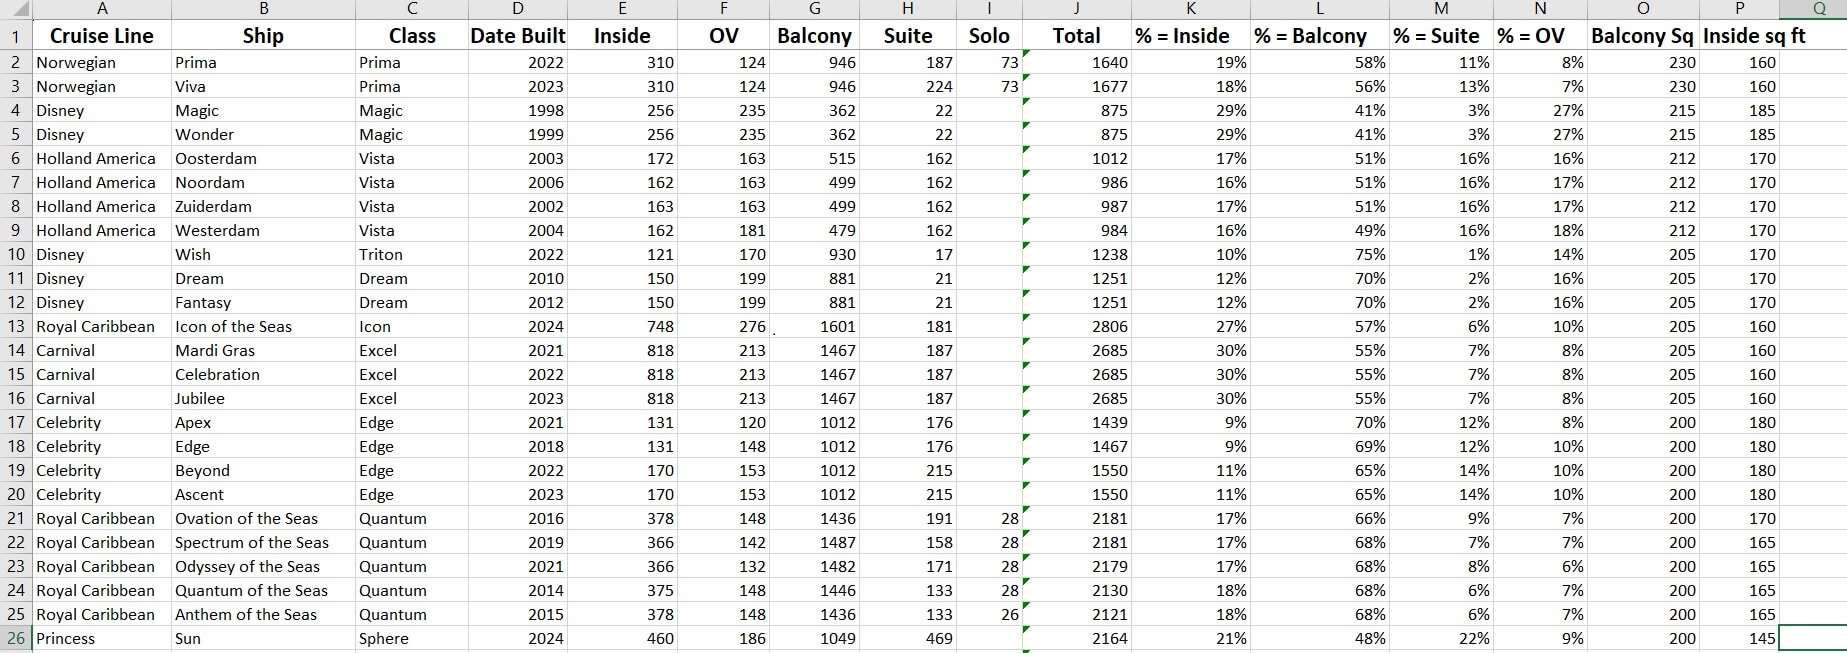 Spreadsheet table of balcony stateroom sizes and numbers across cruise lines